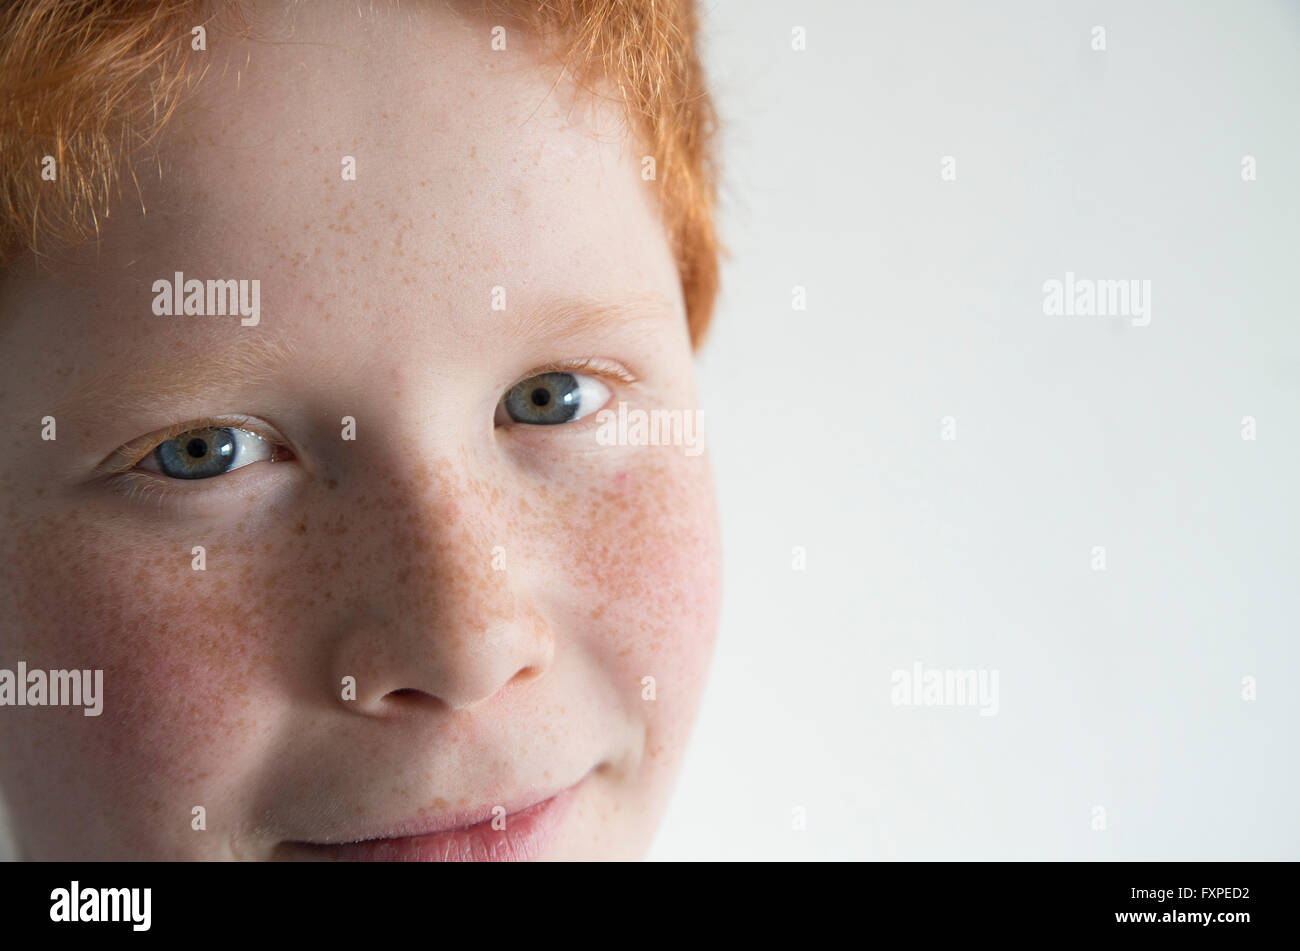 Boy with red hair and freckles, close-up portrait Stock Photo